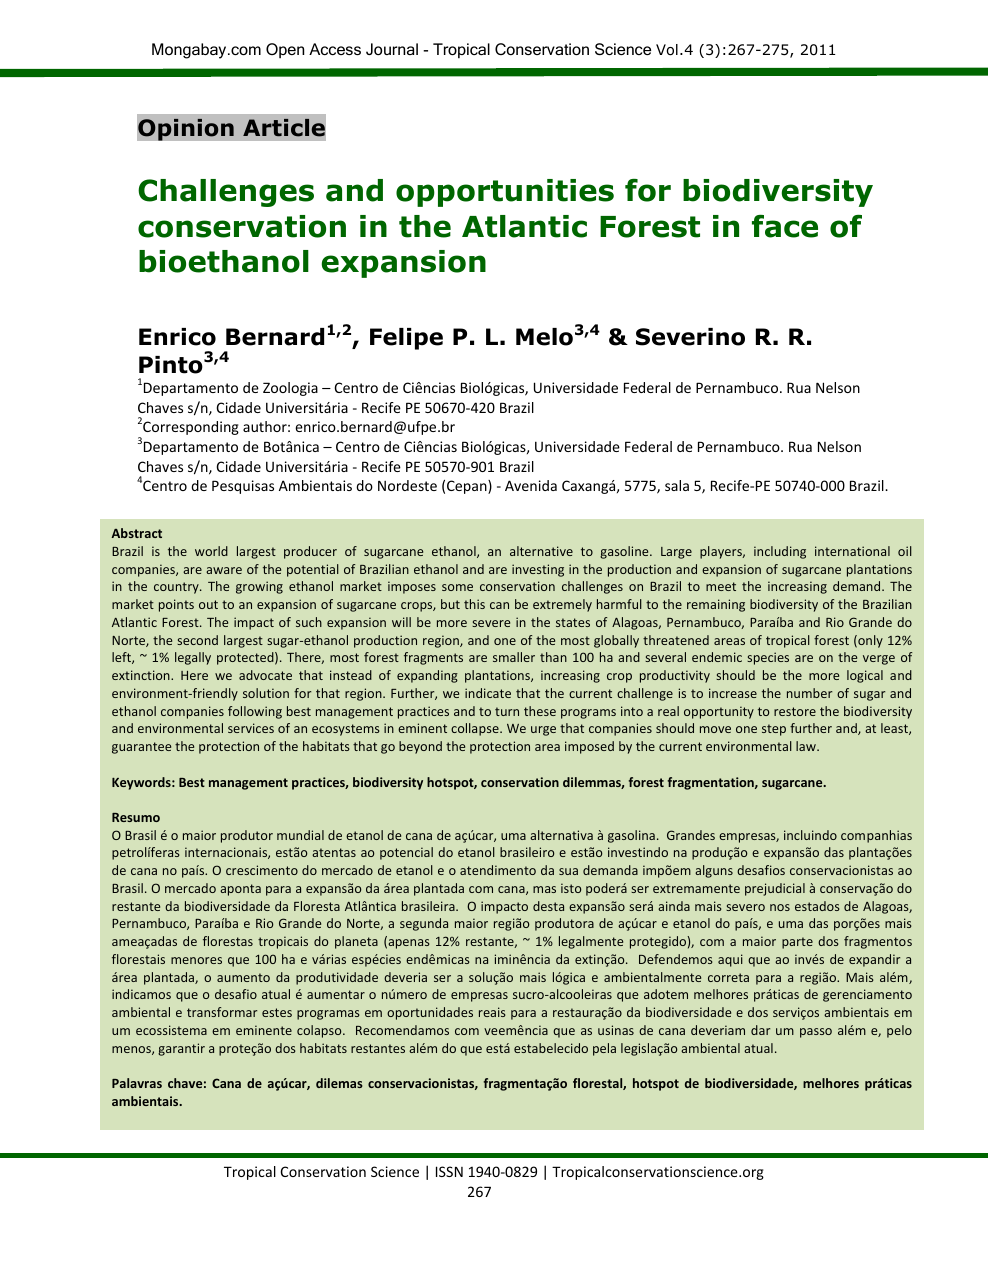 conservation of biodiversity article